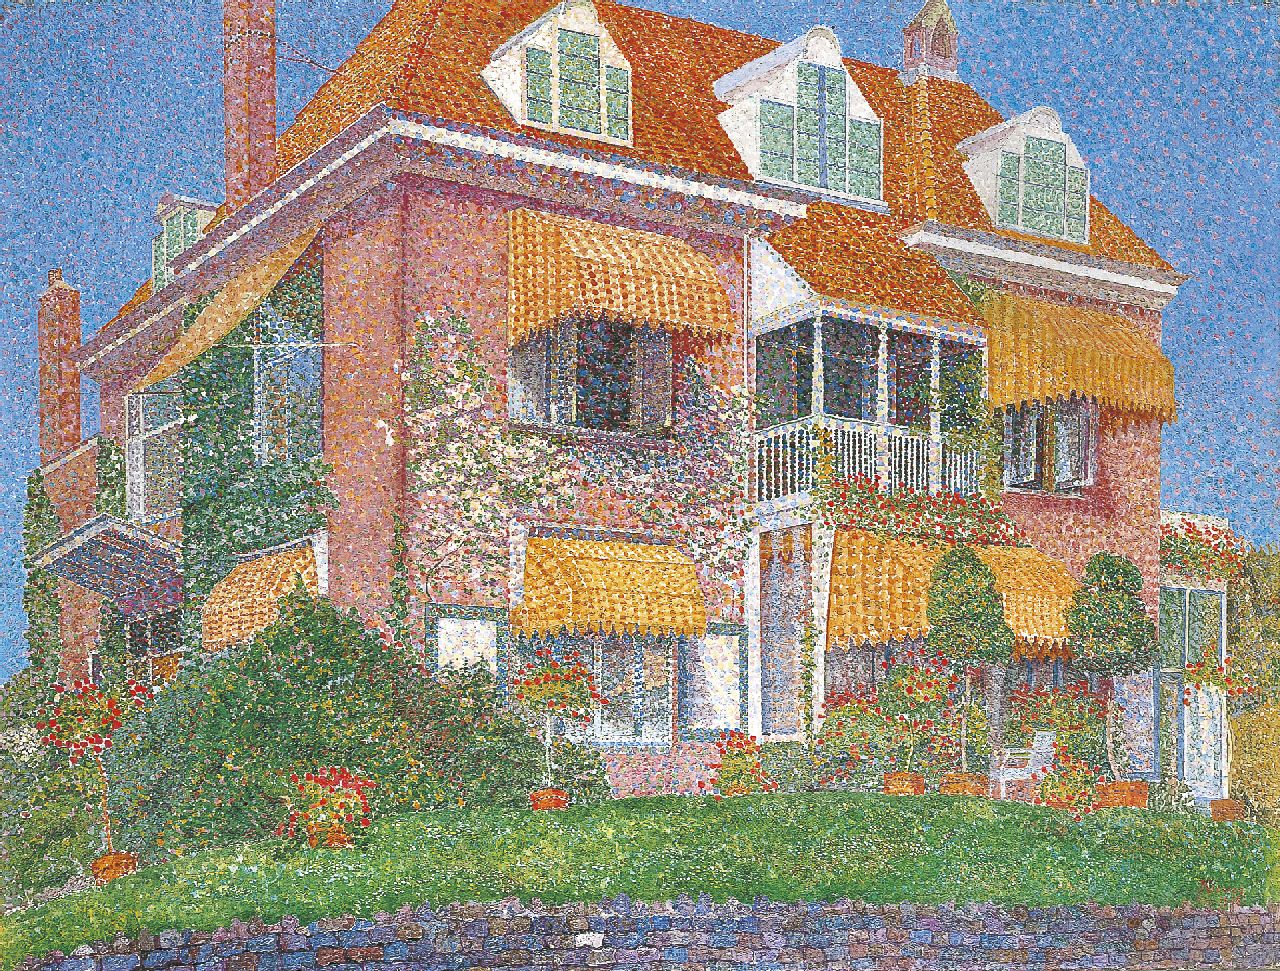 Nieweg J.  | Jakob Nieweg | Paintings offered for sale | Villa Kinheim, Bloemendaal, oil on canvas 61.6 x 80.6 cm, signed l.r. and dated Aug. 1915